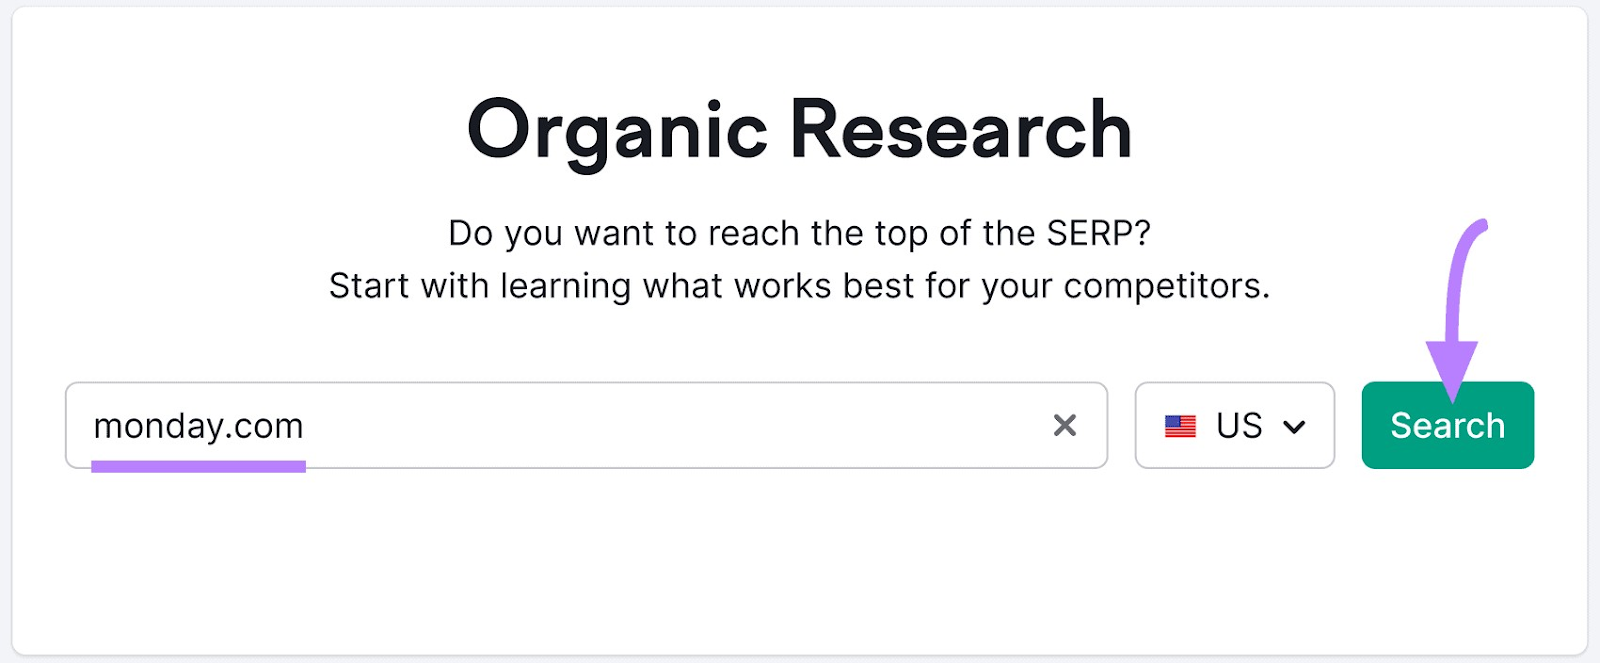 "monday.com" entered into Organic Research tool search bar